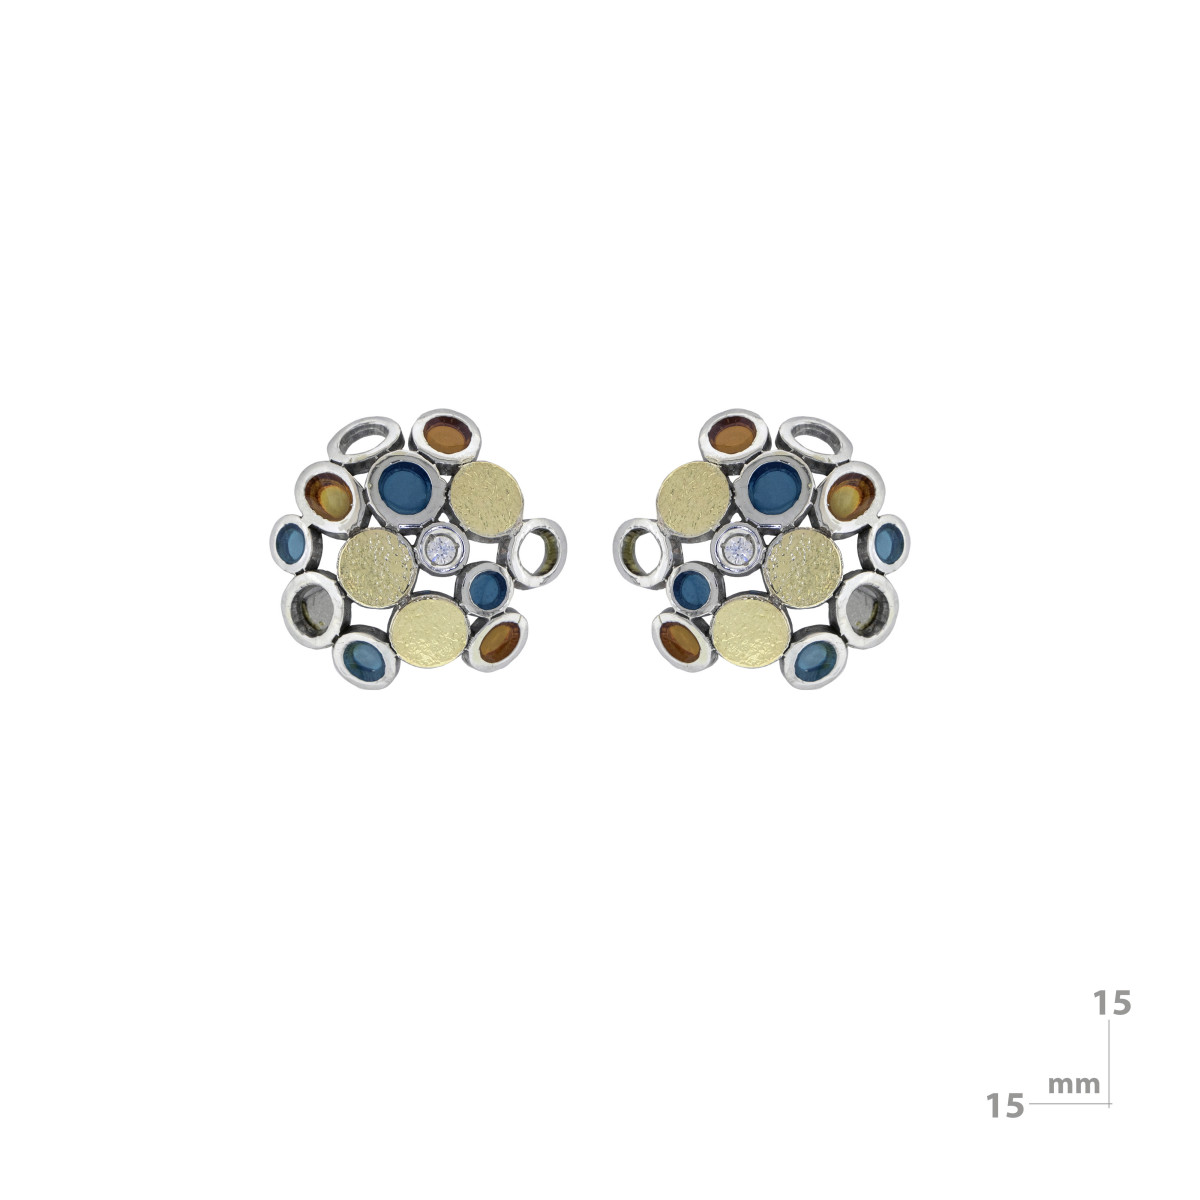 Earrings made of silver, gold, enamel and brilliant